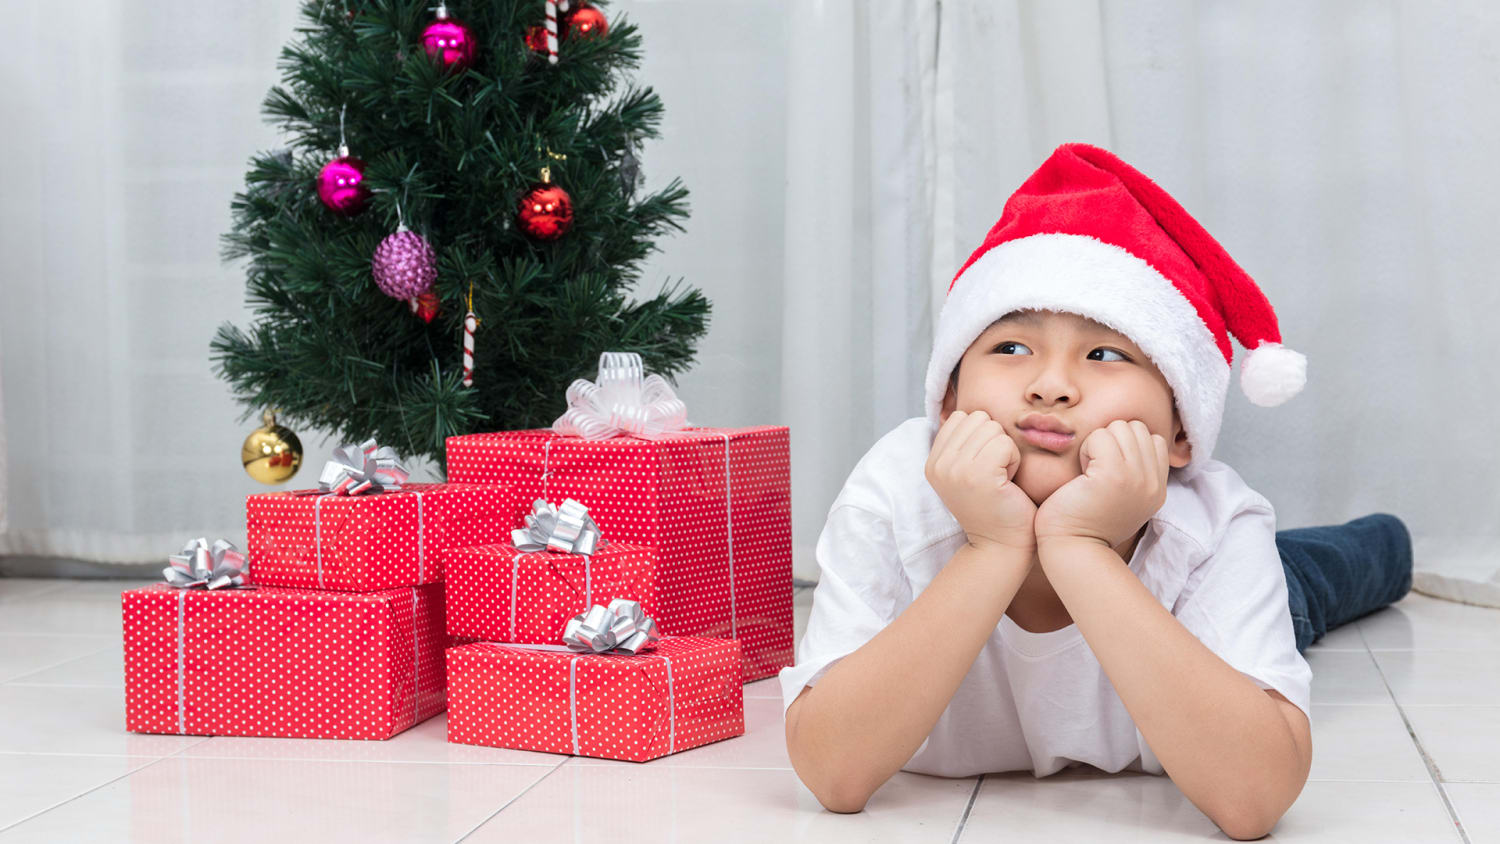 5 ways to deal with meltdowns and tantrums on Christmas